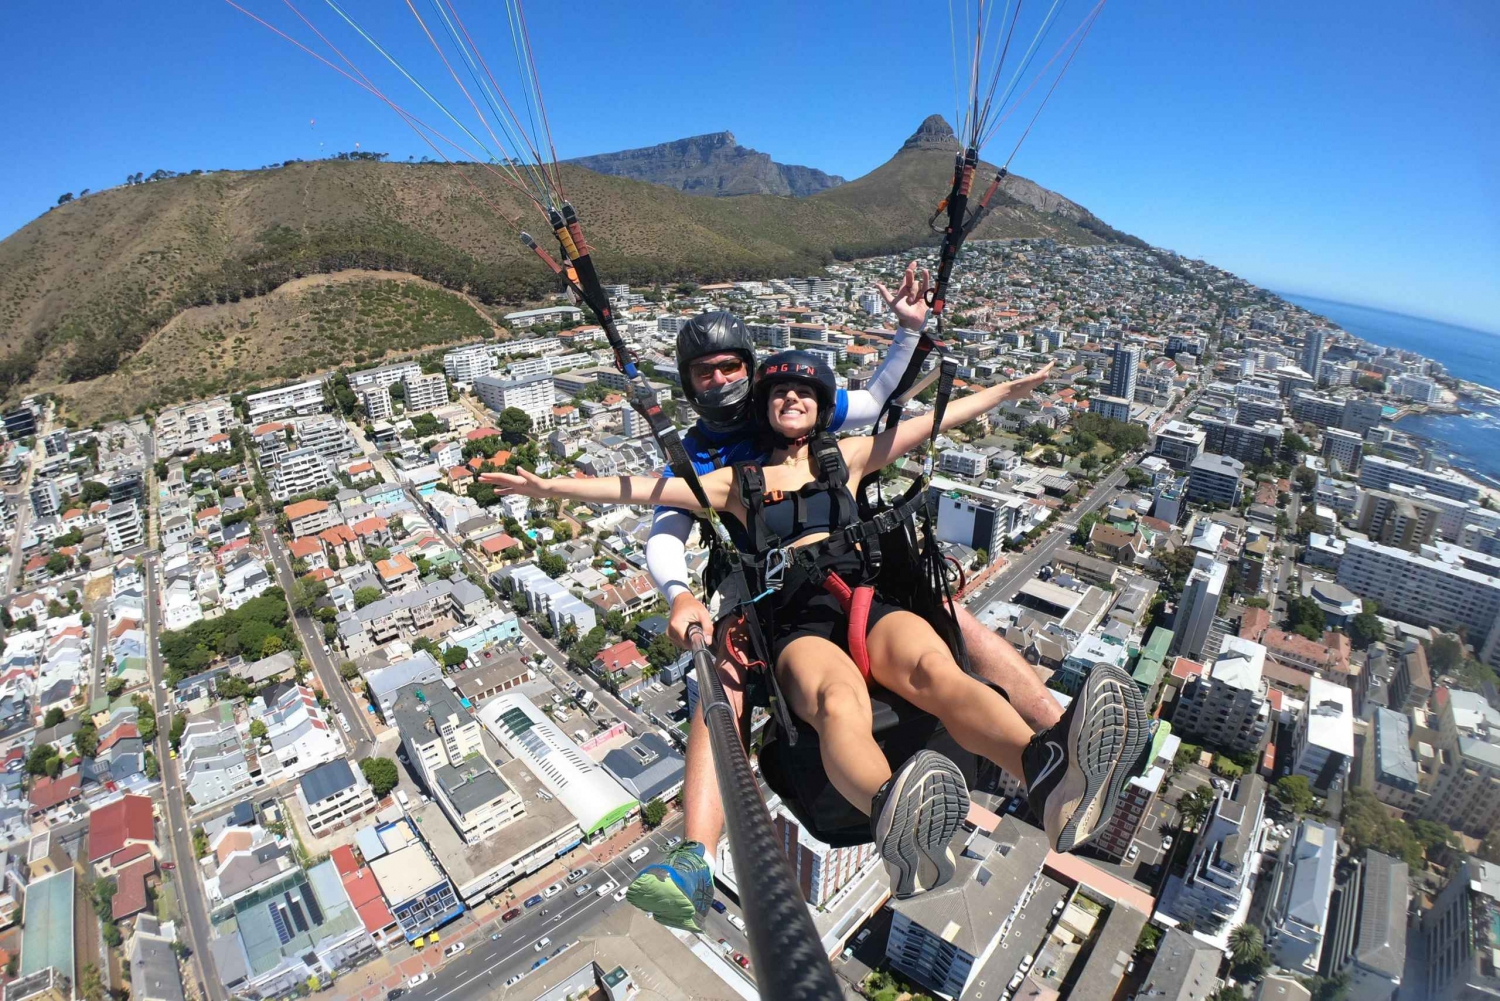 Cape Town: Tandem Paragliding with views of Table Mountain